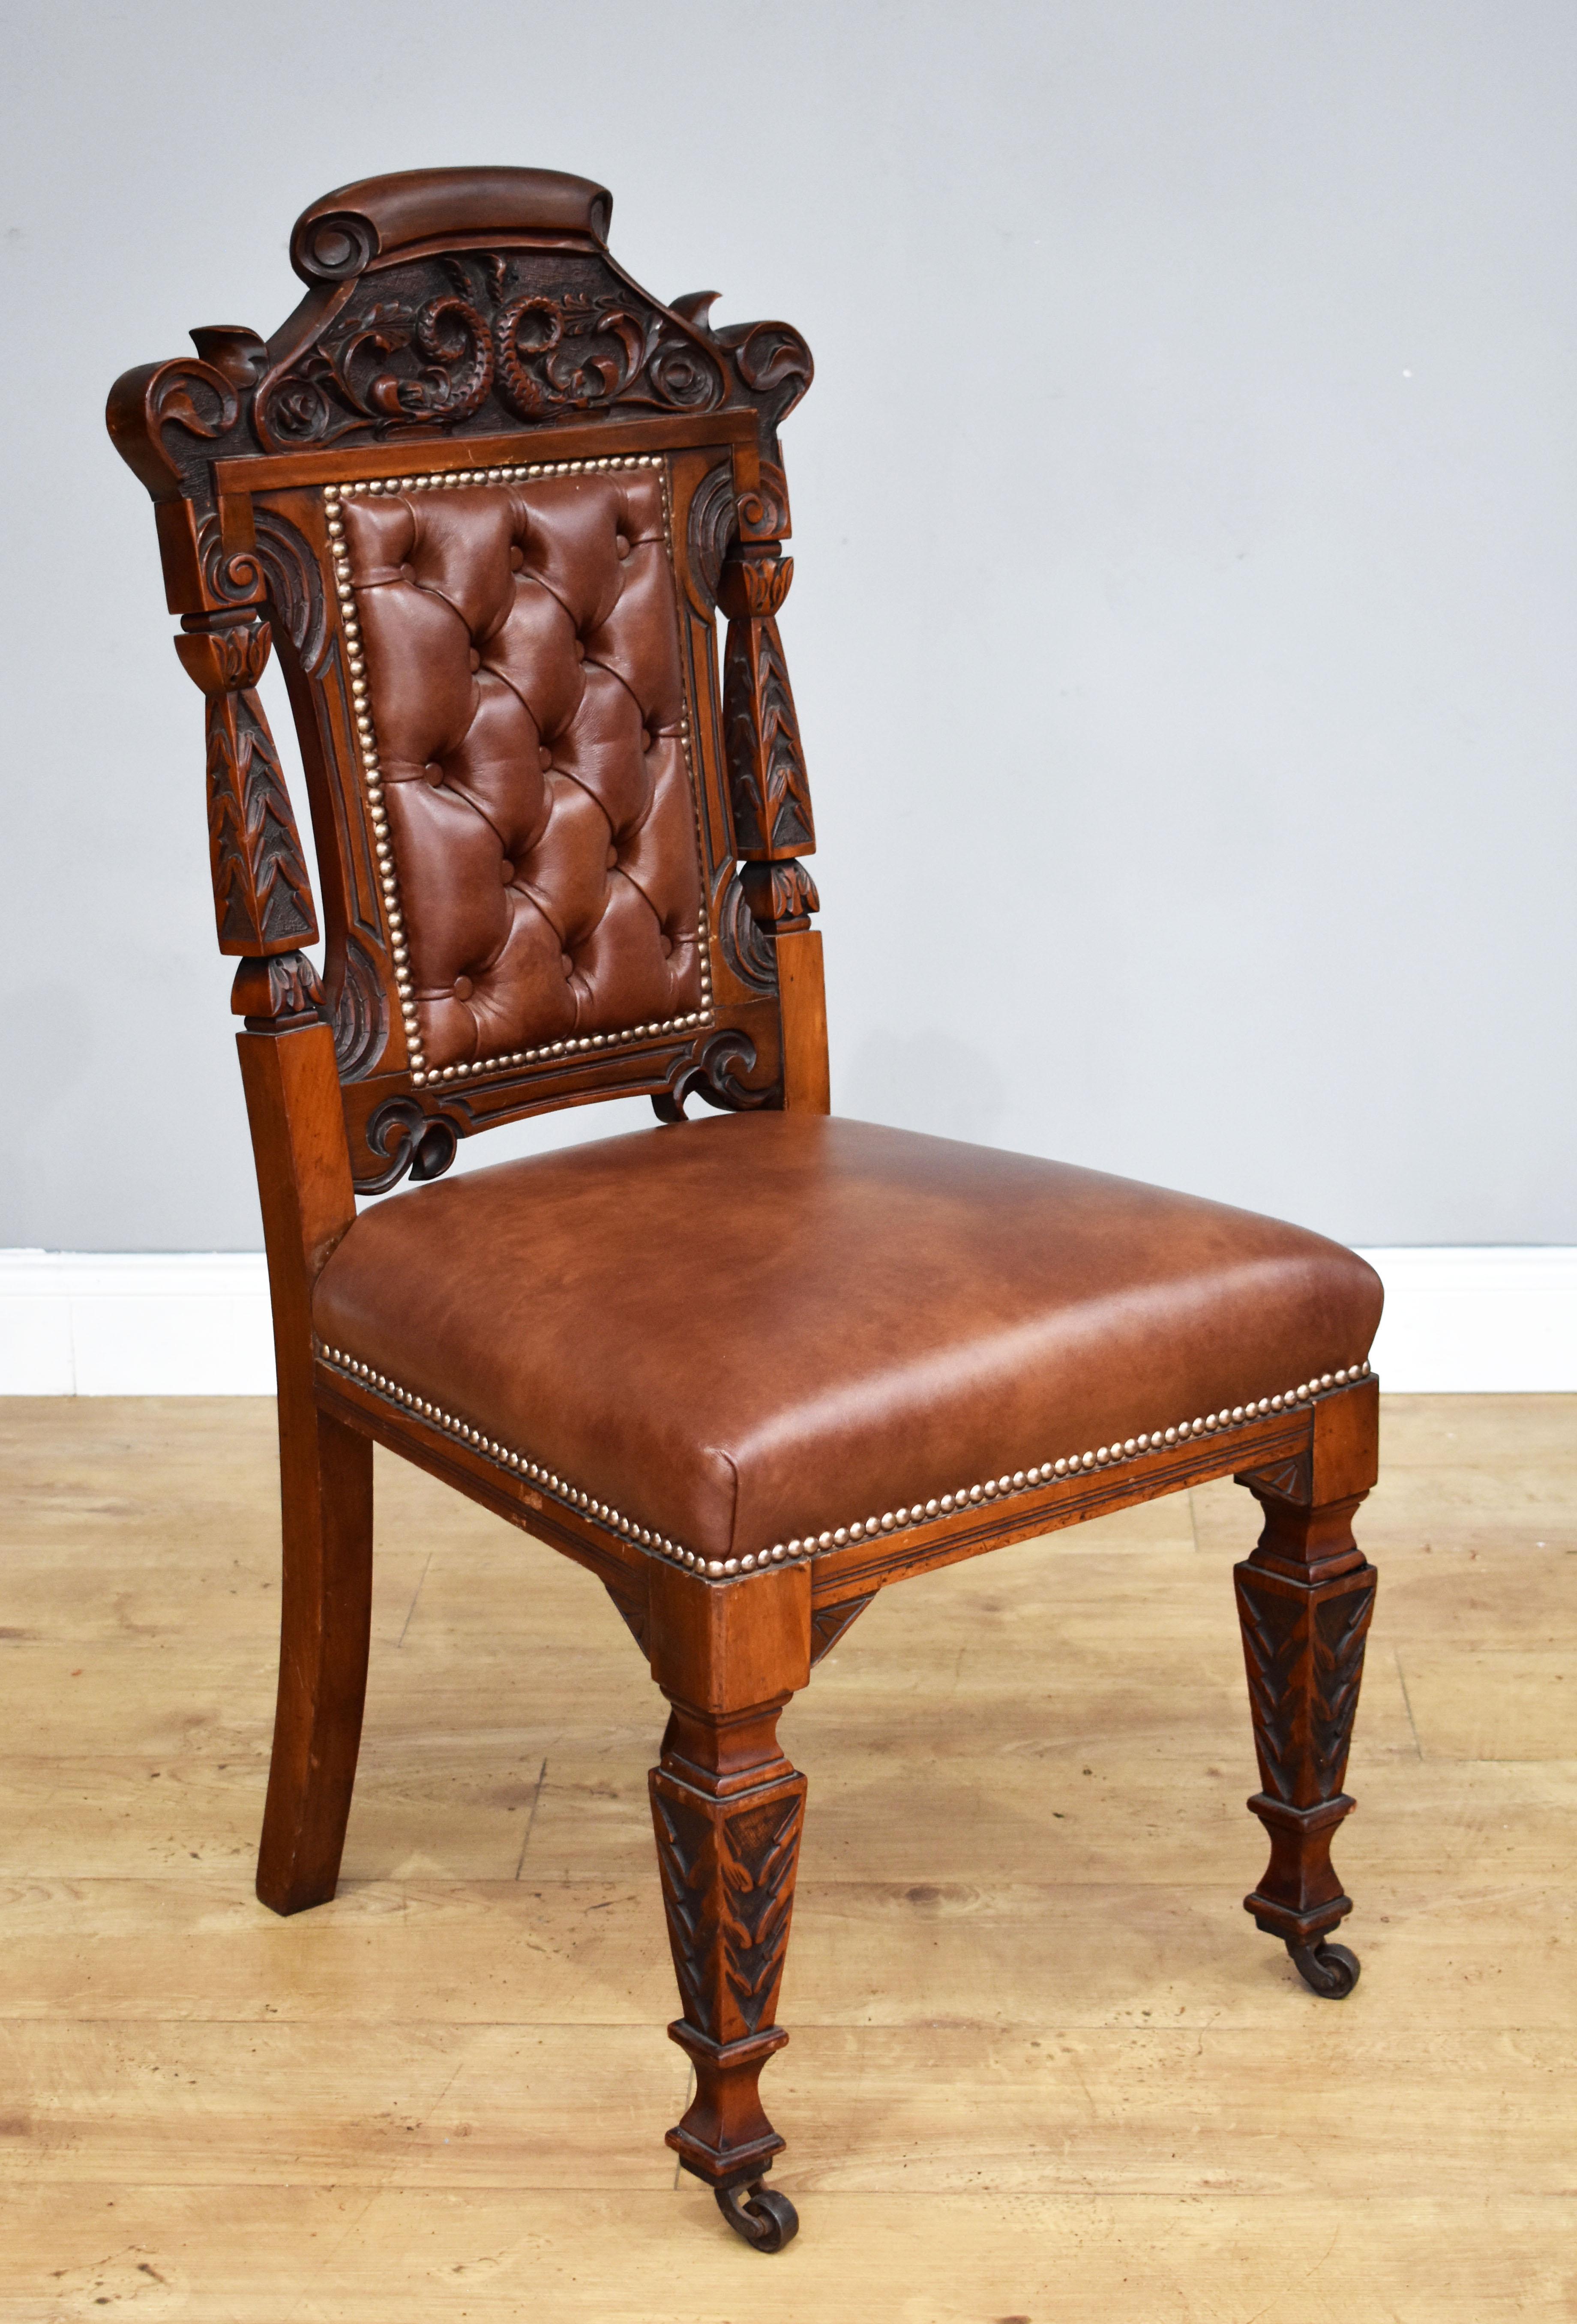 For sale is a fine quality set of 6 Victorian carved walnut dining chairs, having a deep buttoned upholstered back, above a stuff over seat, standing on carved legs terminating on castors. All of the chairs are in good condition, remaining